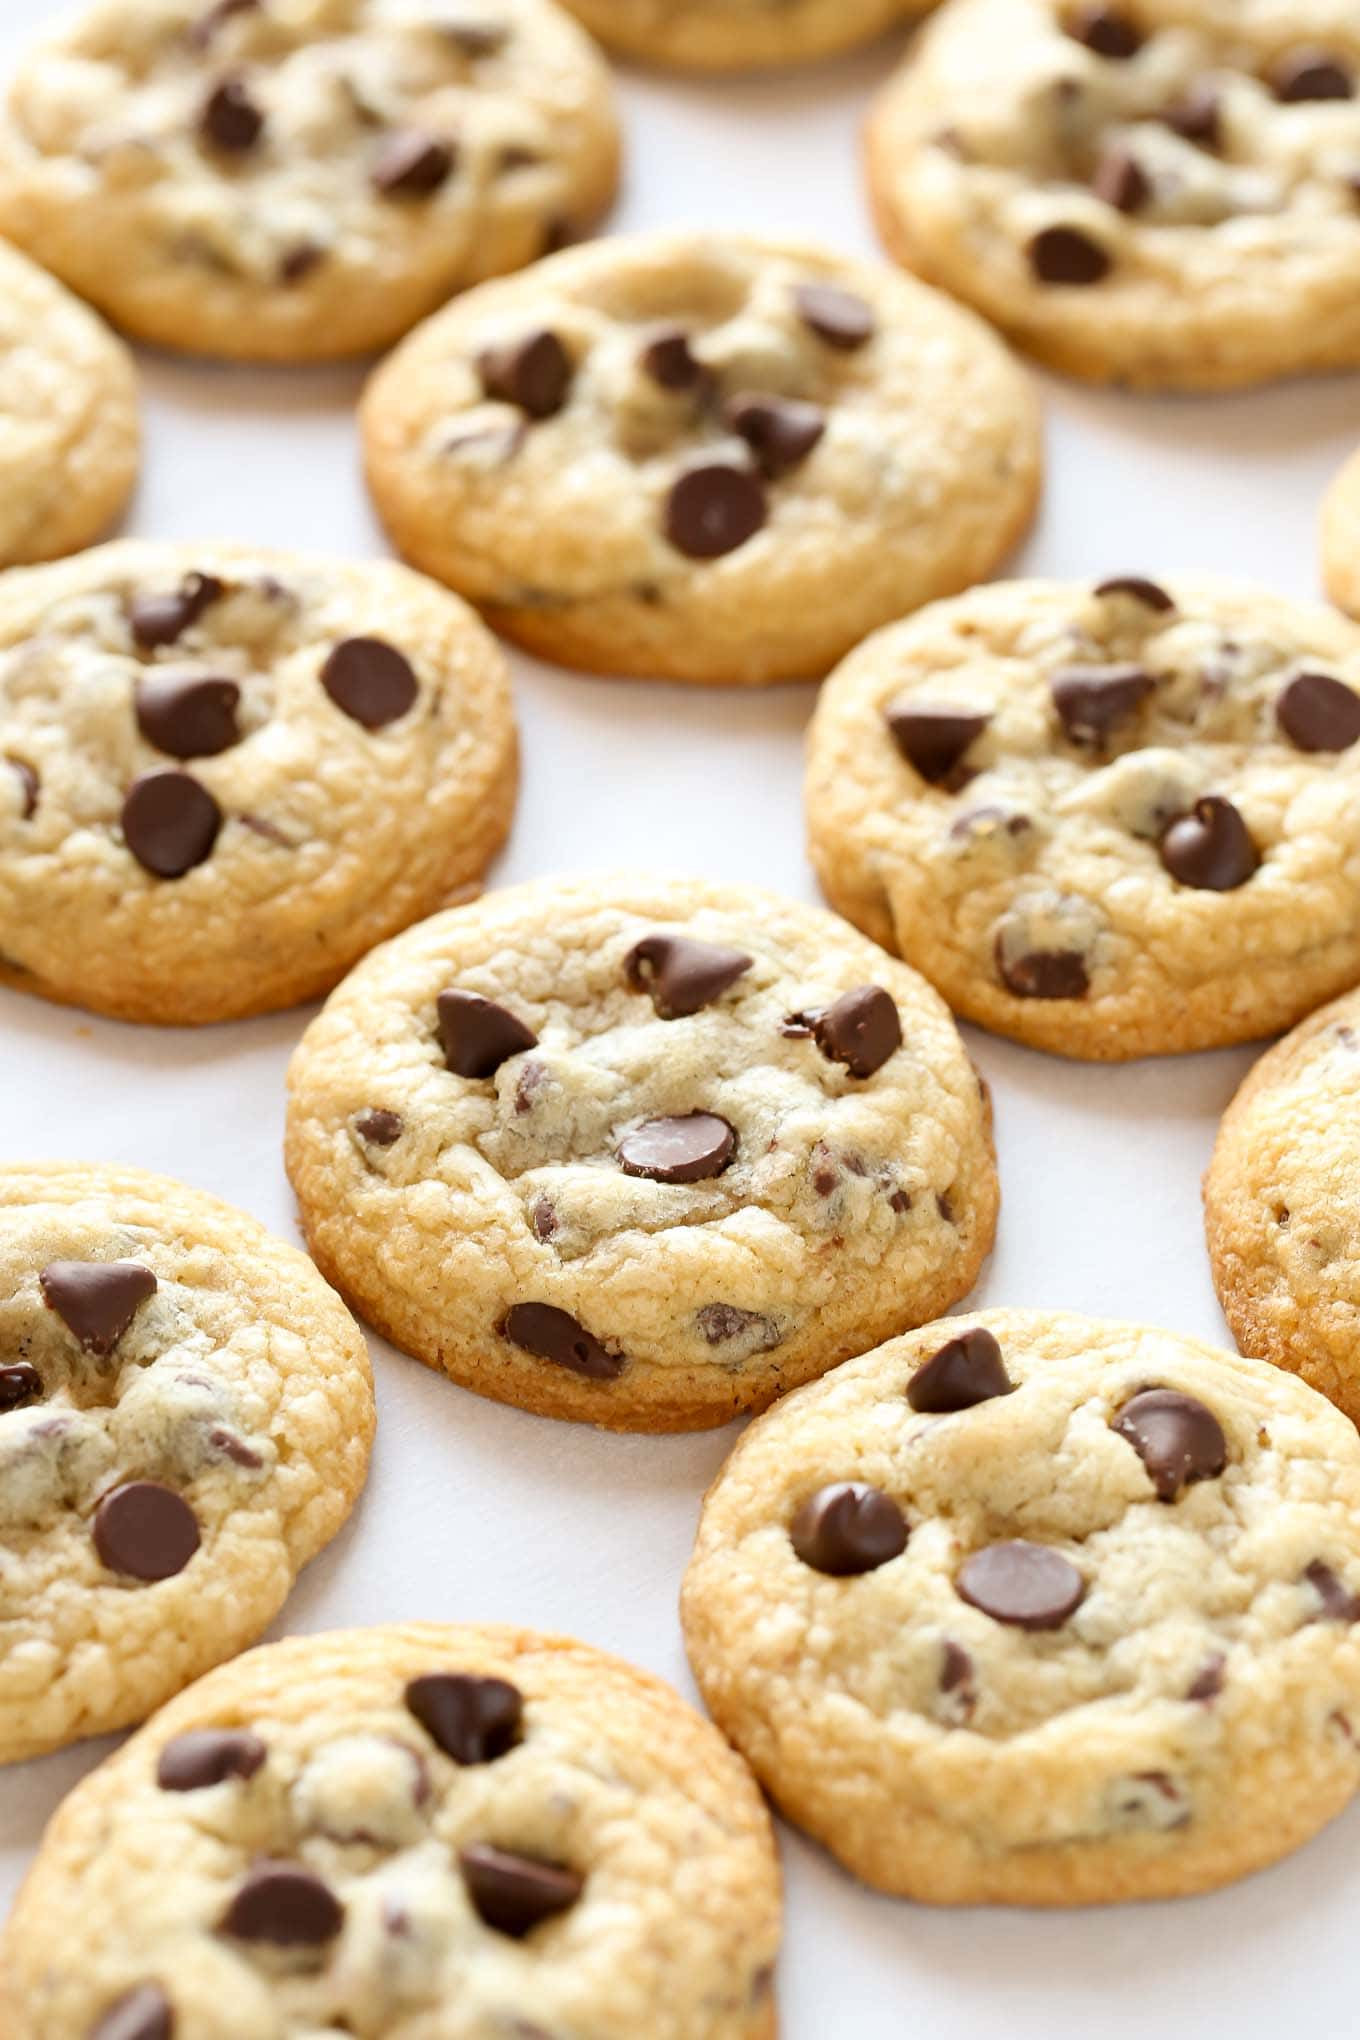 Soft Chewy Choc Chip Cookies Recipe
 Soft and Chewy Chocolate Chip Cookies Recipe